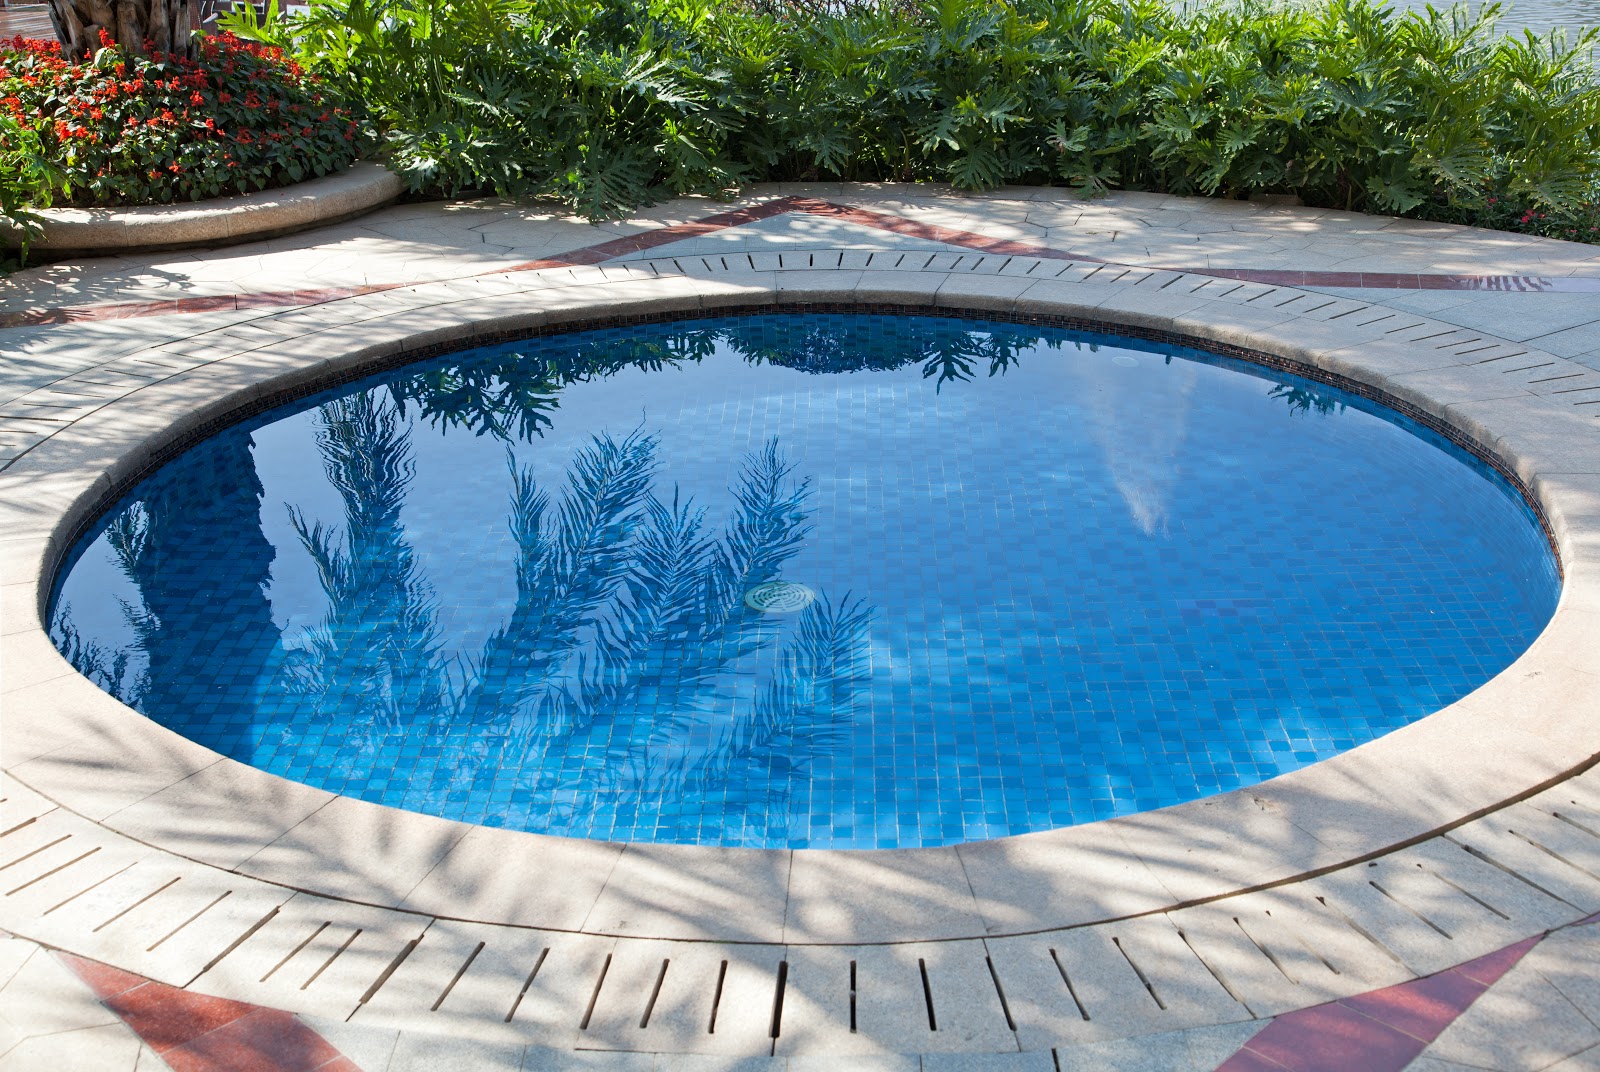 Space-Effective Designs Canadian pool trends